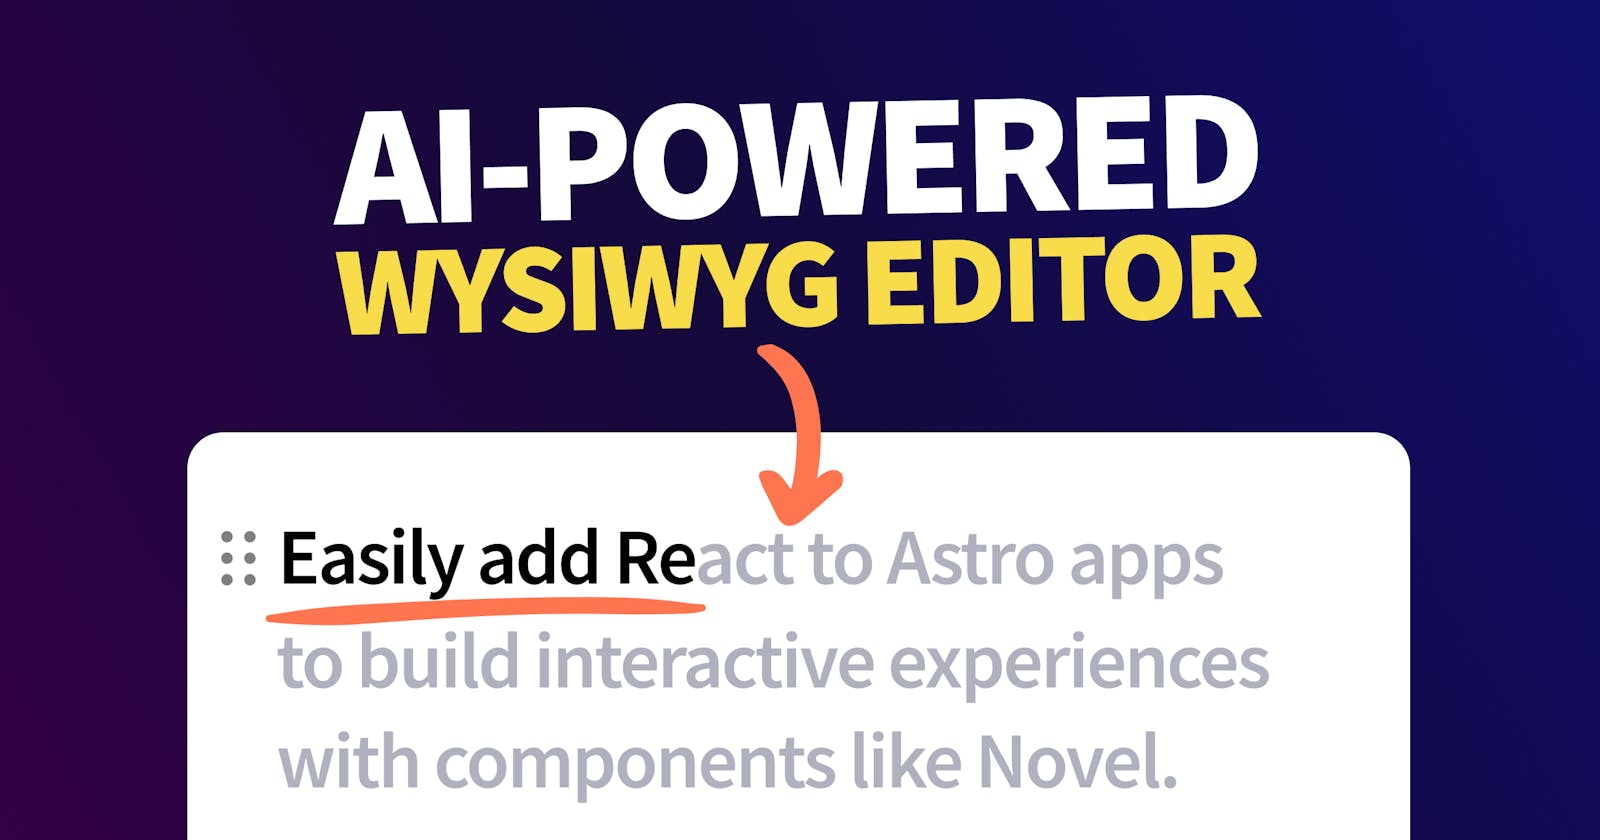 How to Add an AI-Powered WYSIWYG Editor in React & Astro with Novel